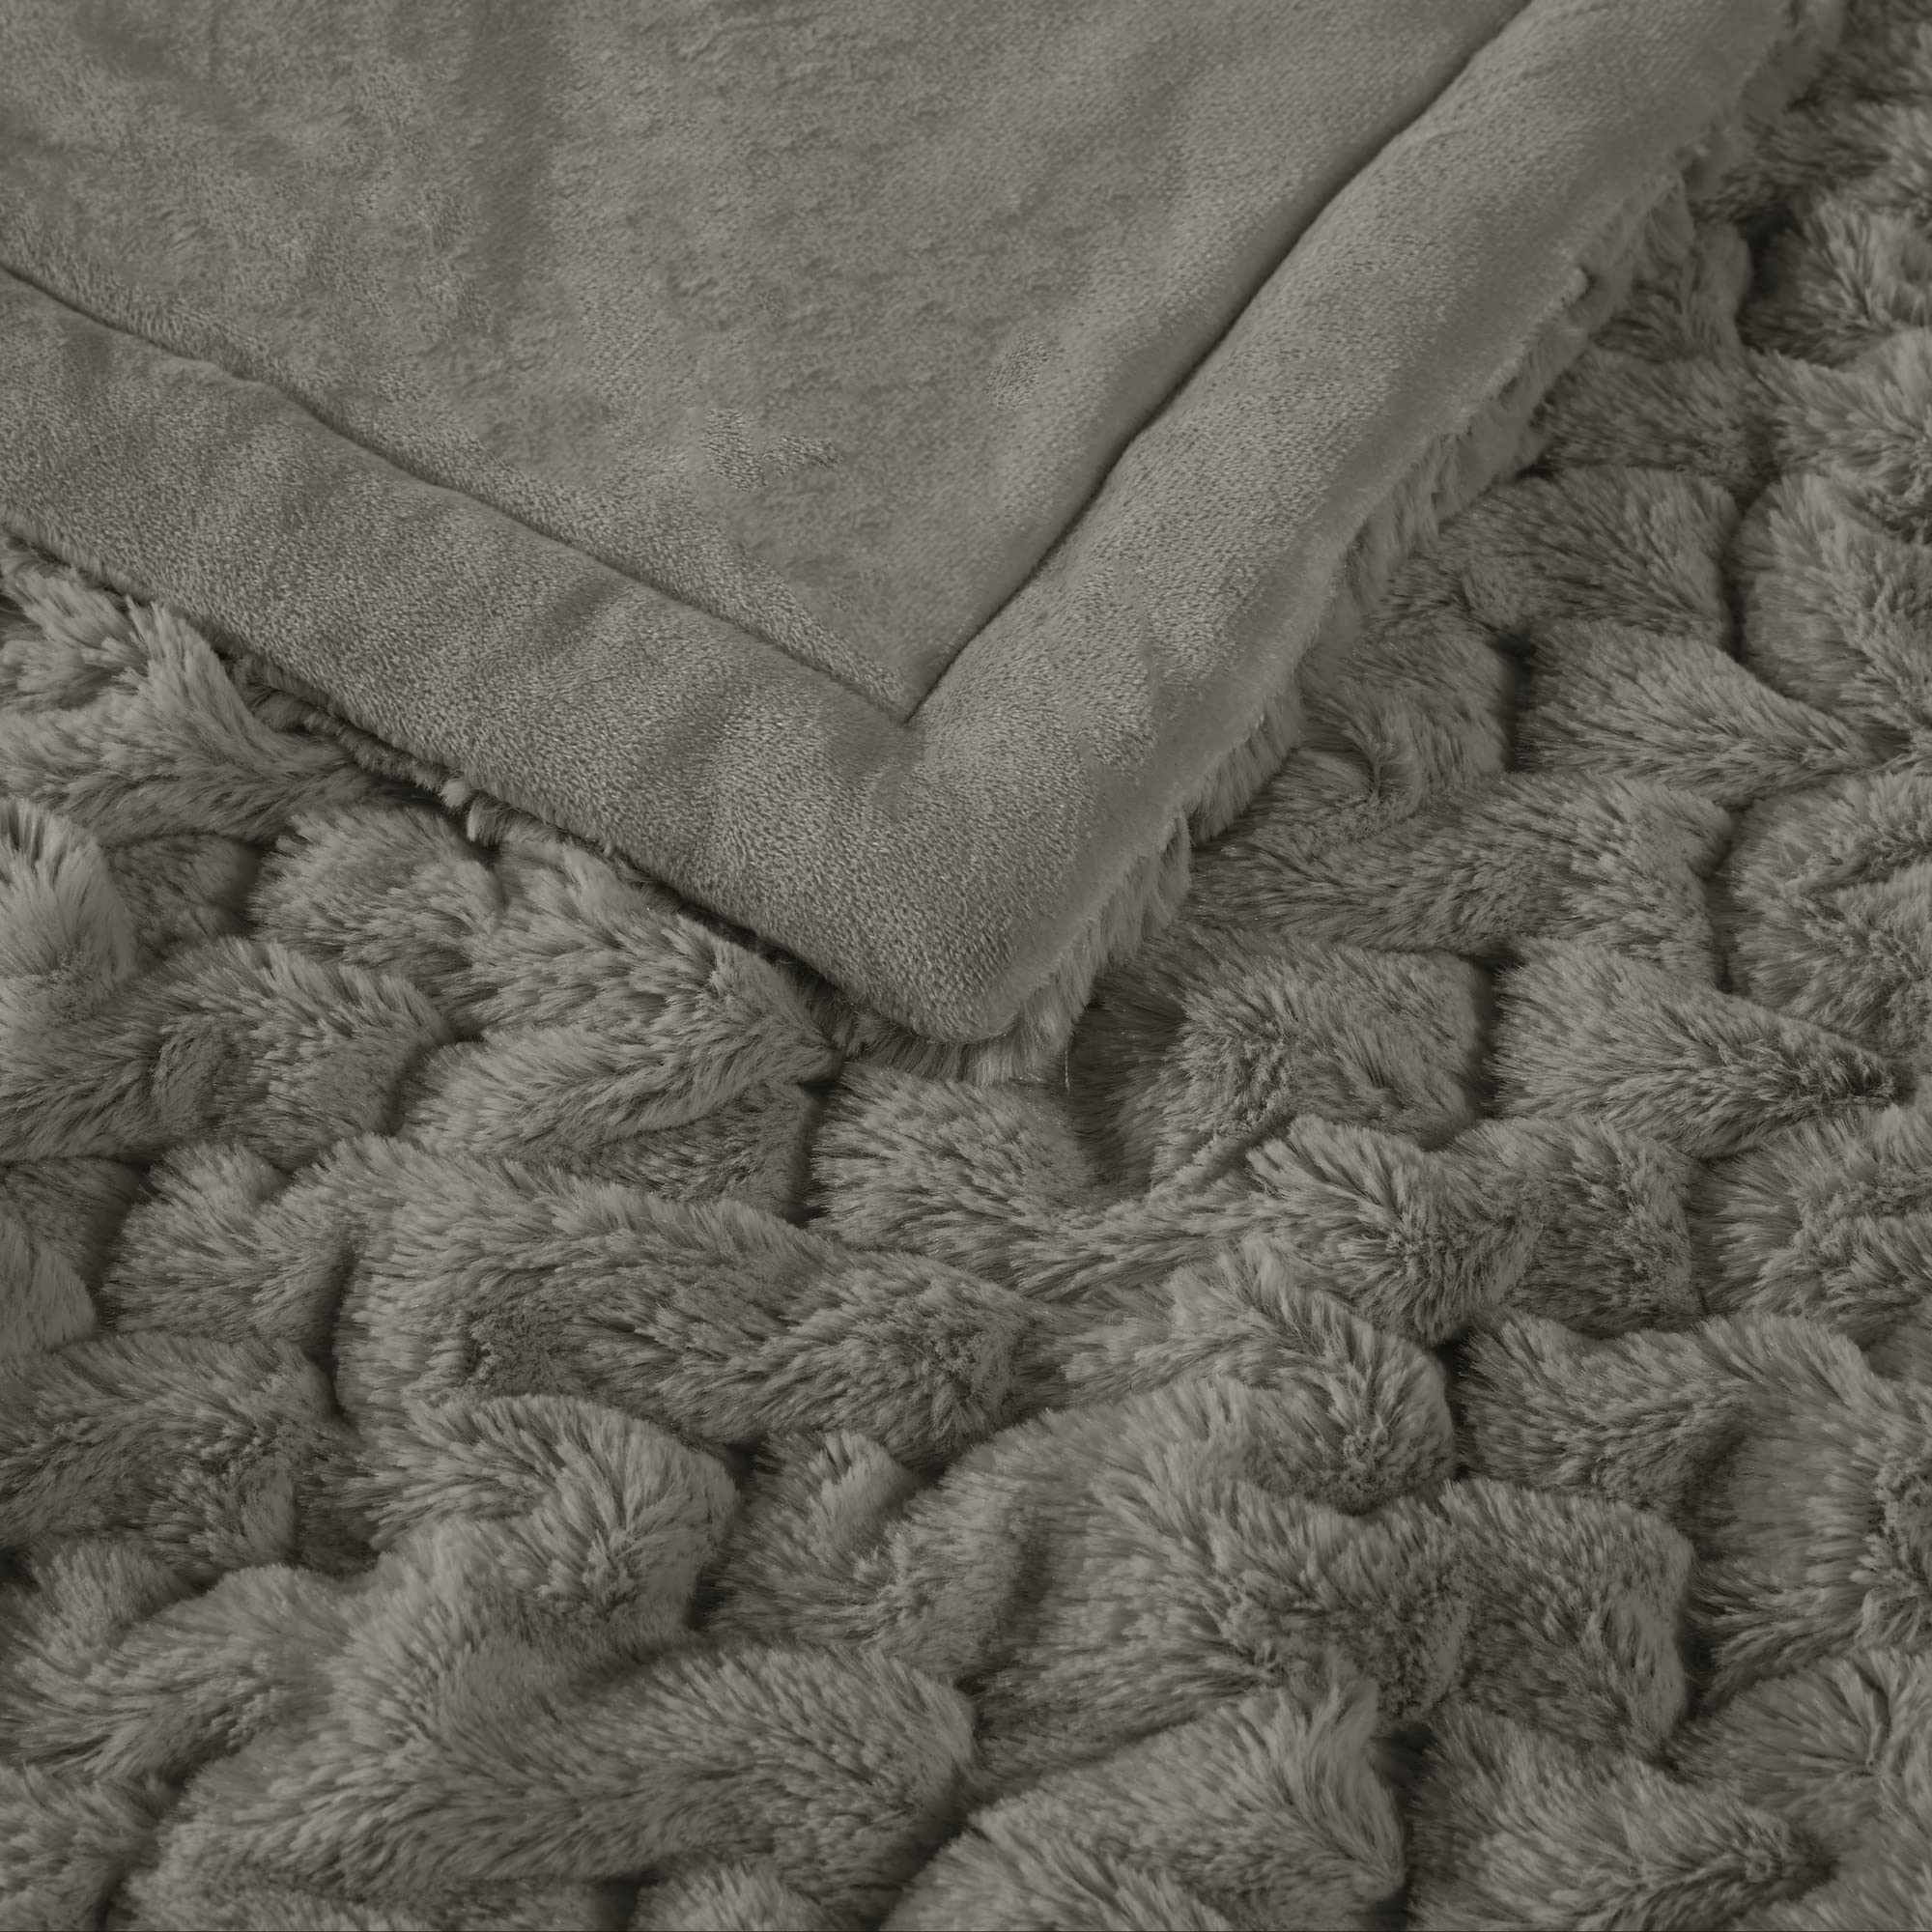 Madison Park Ruched Fur Luxury Throw Premium Soft Cozy Brushed Long Faux Fur For Bed, Couch or Sofa , 50x60